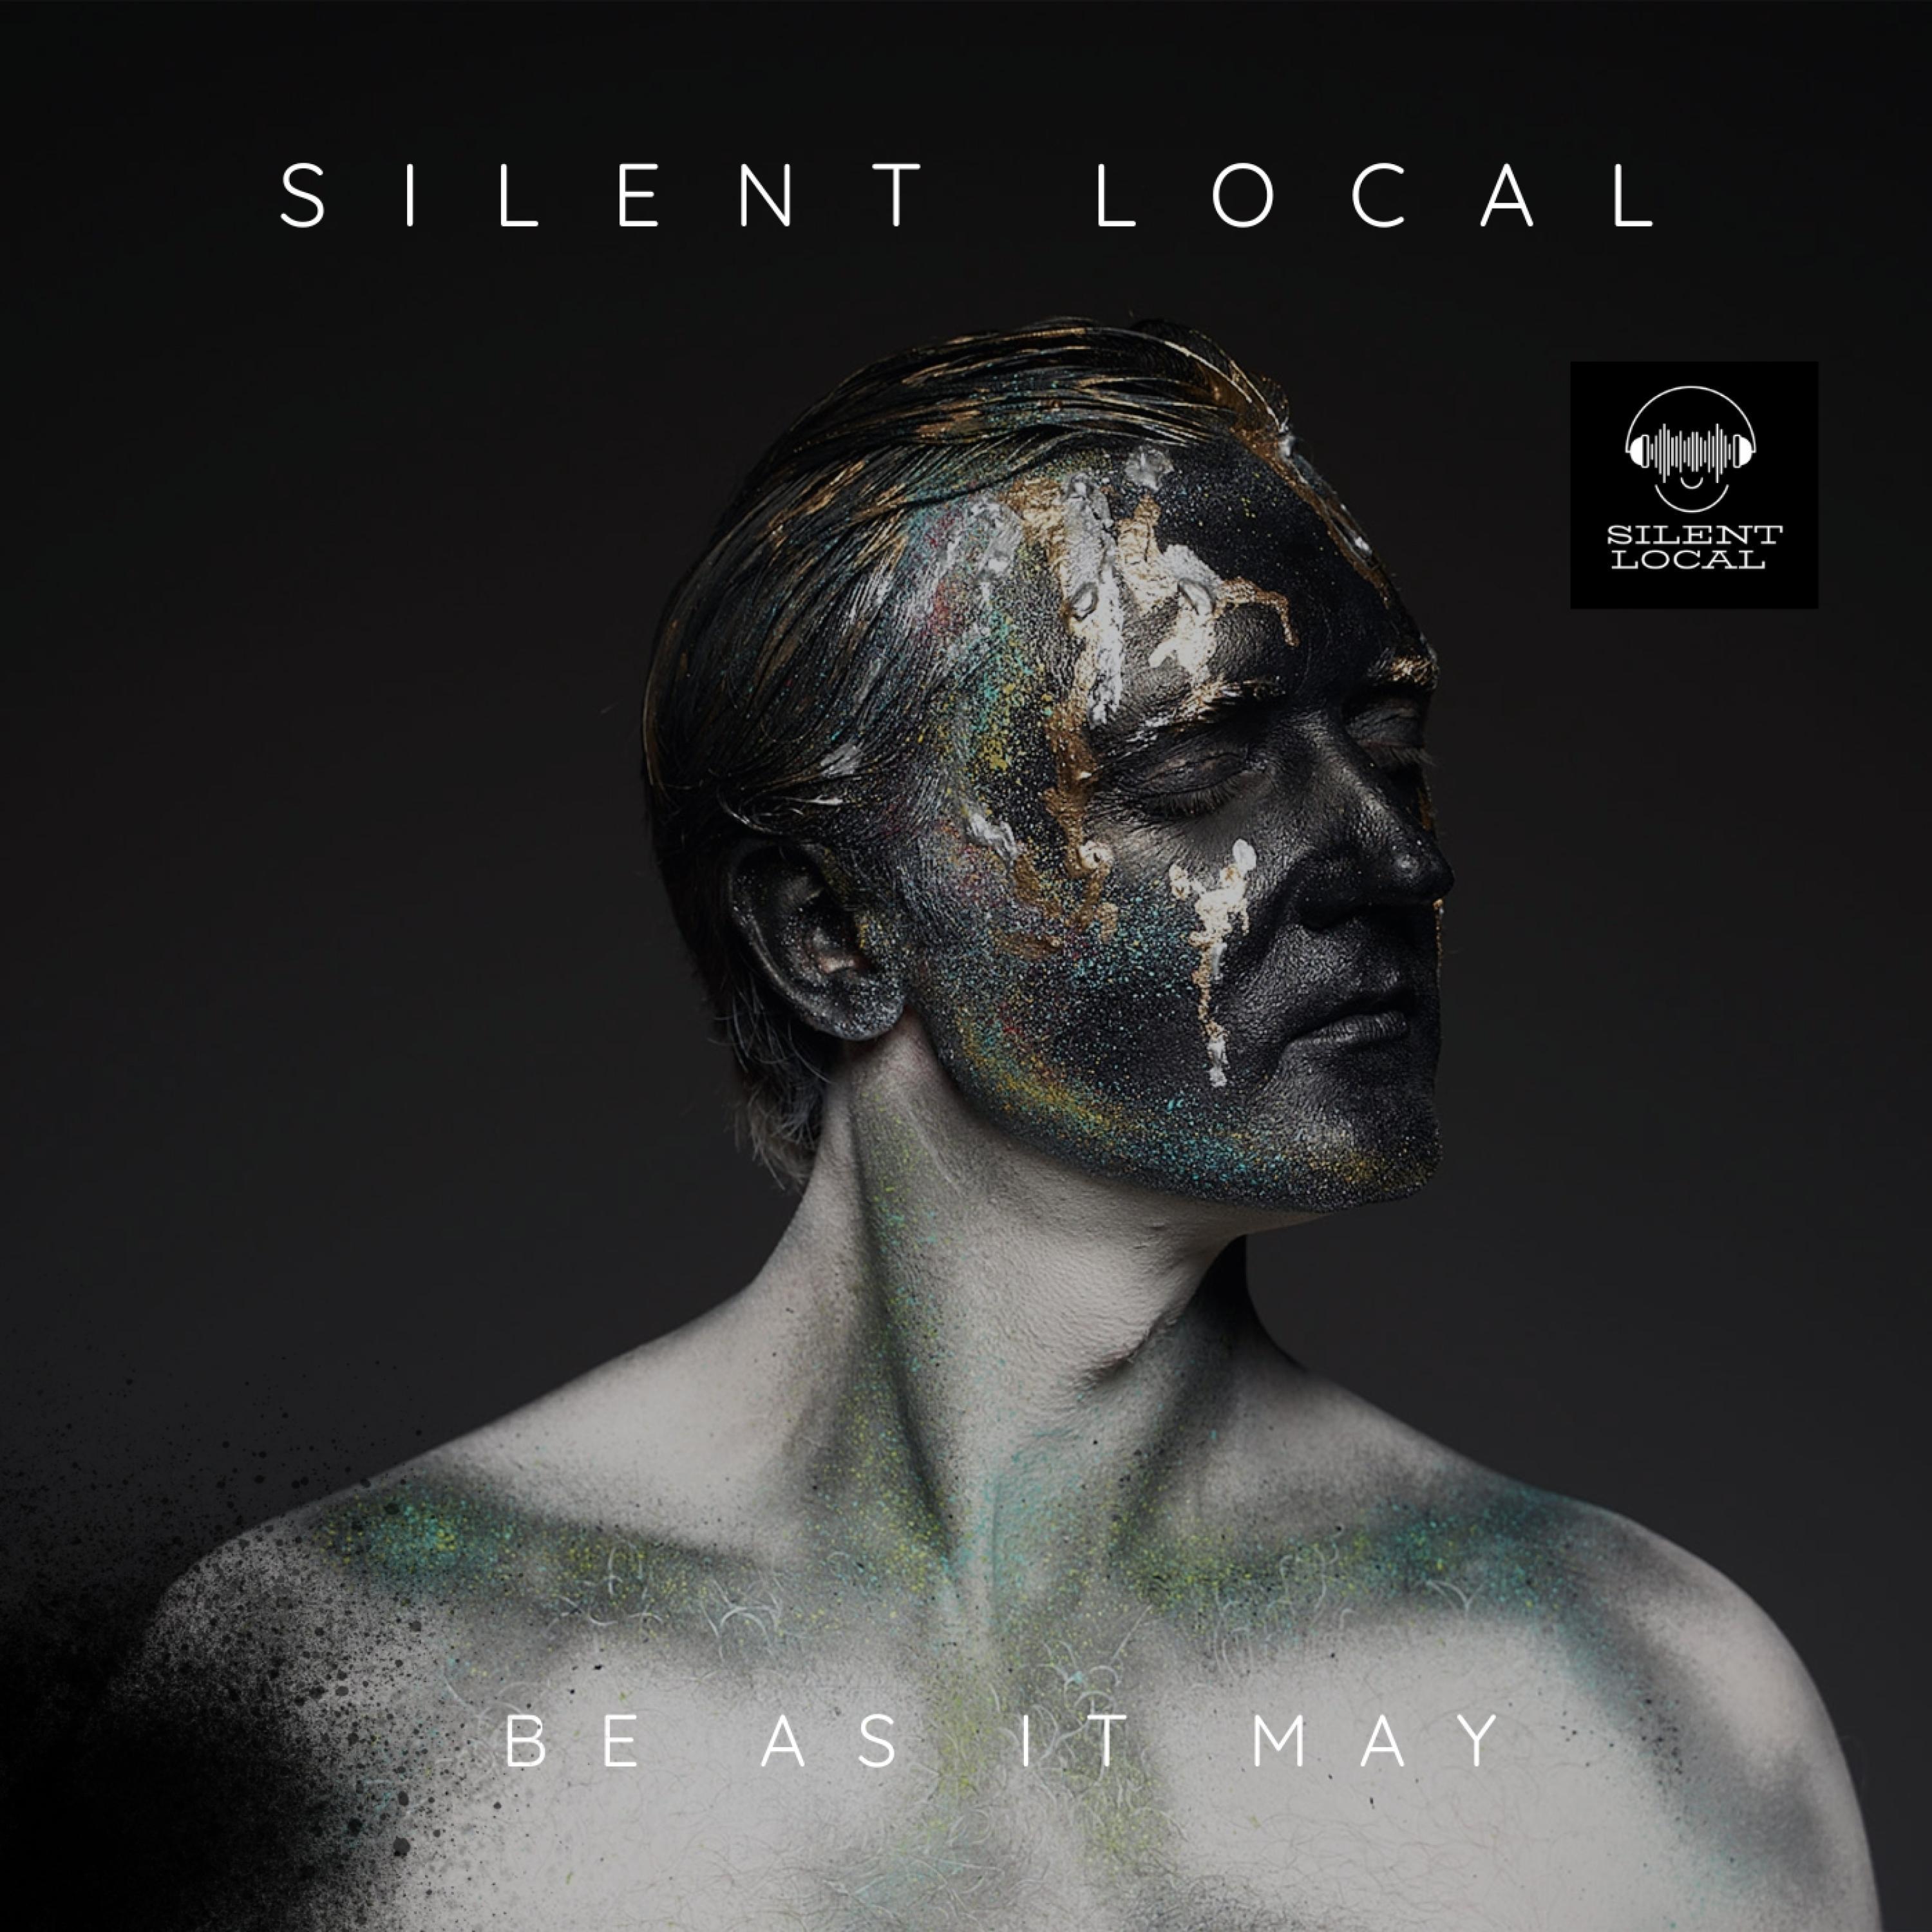 Silent Local - Be as it may